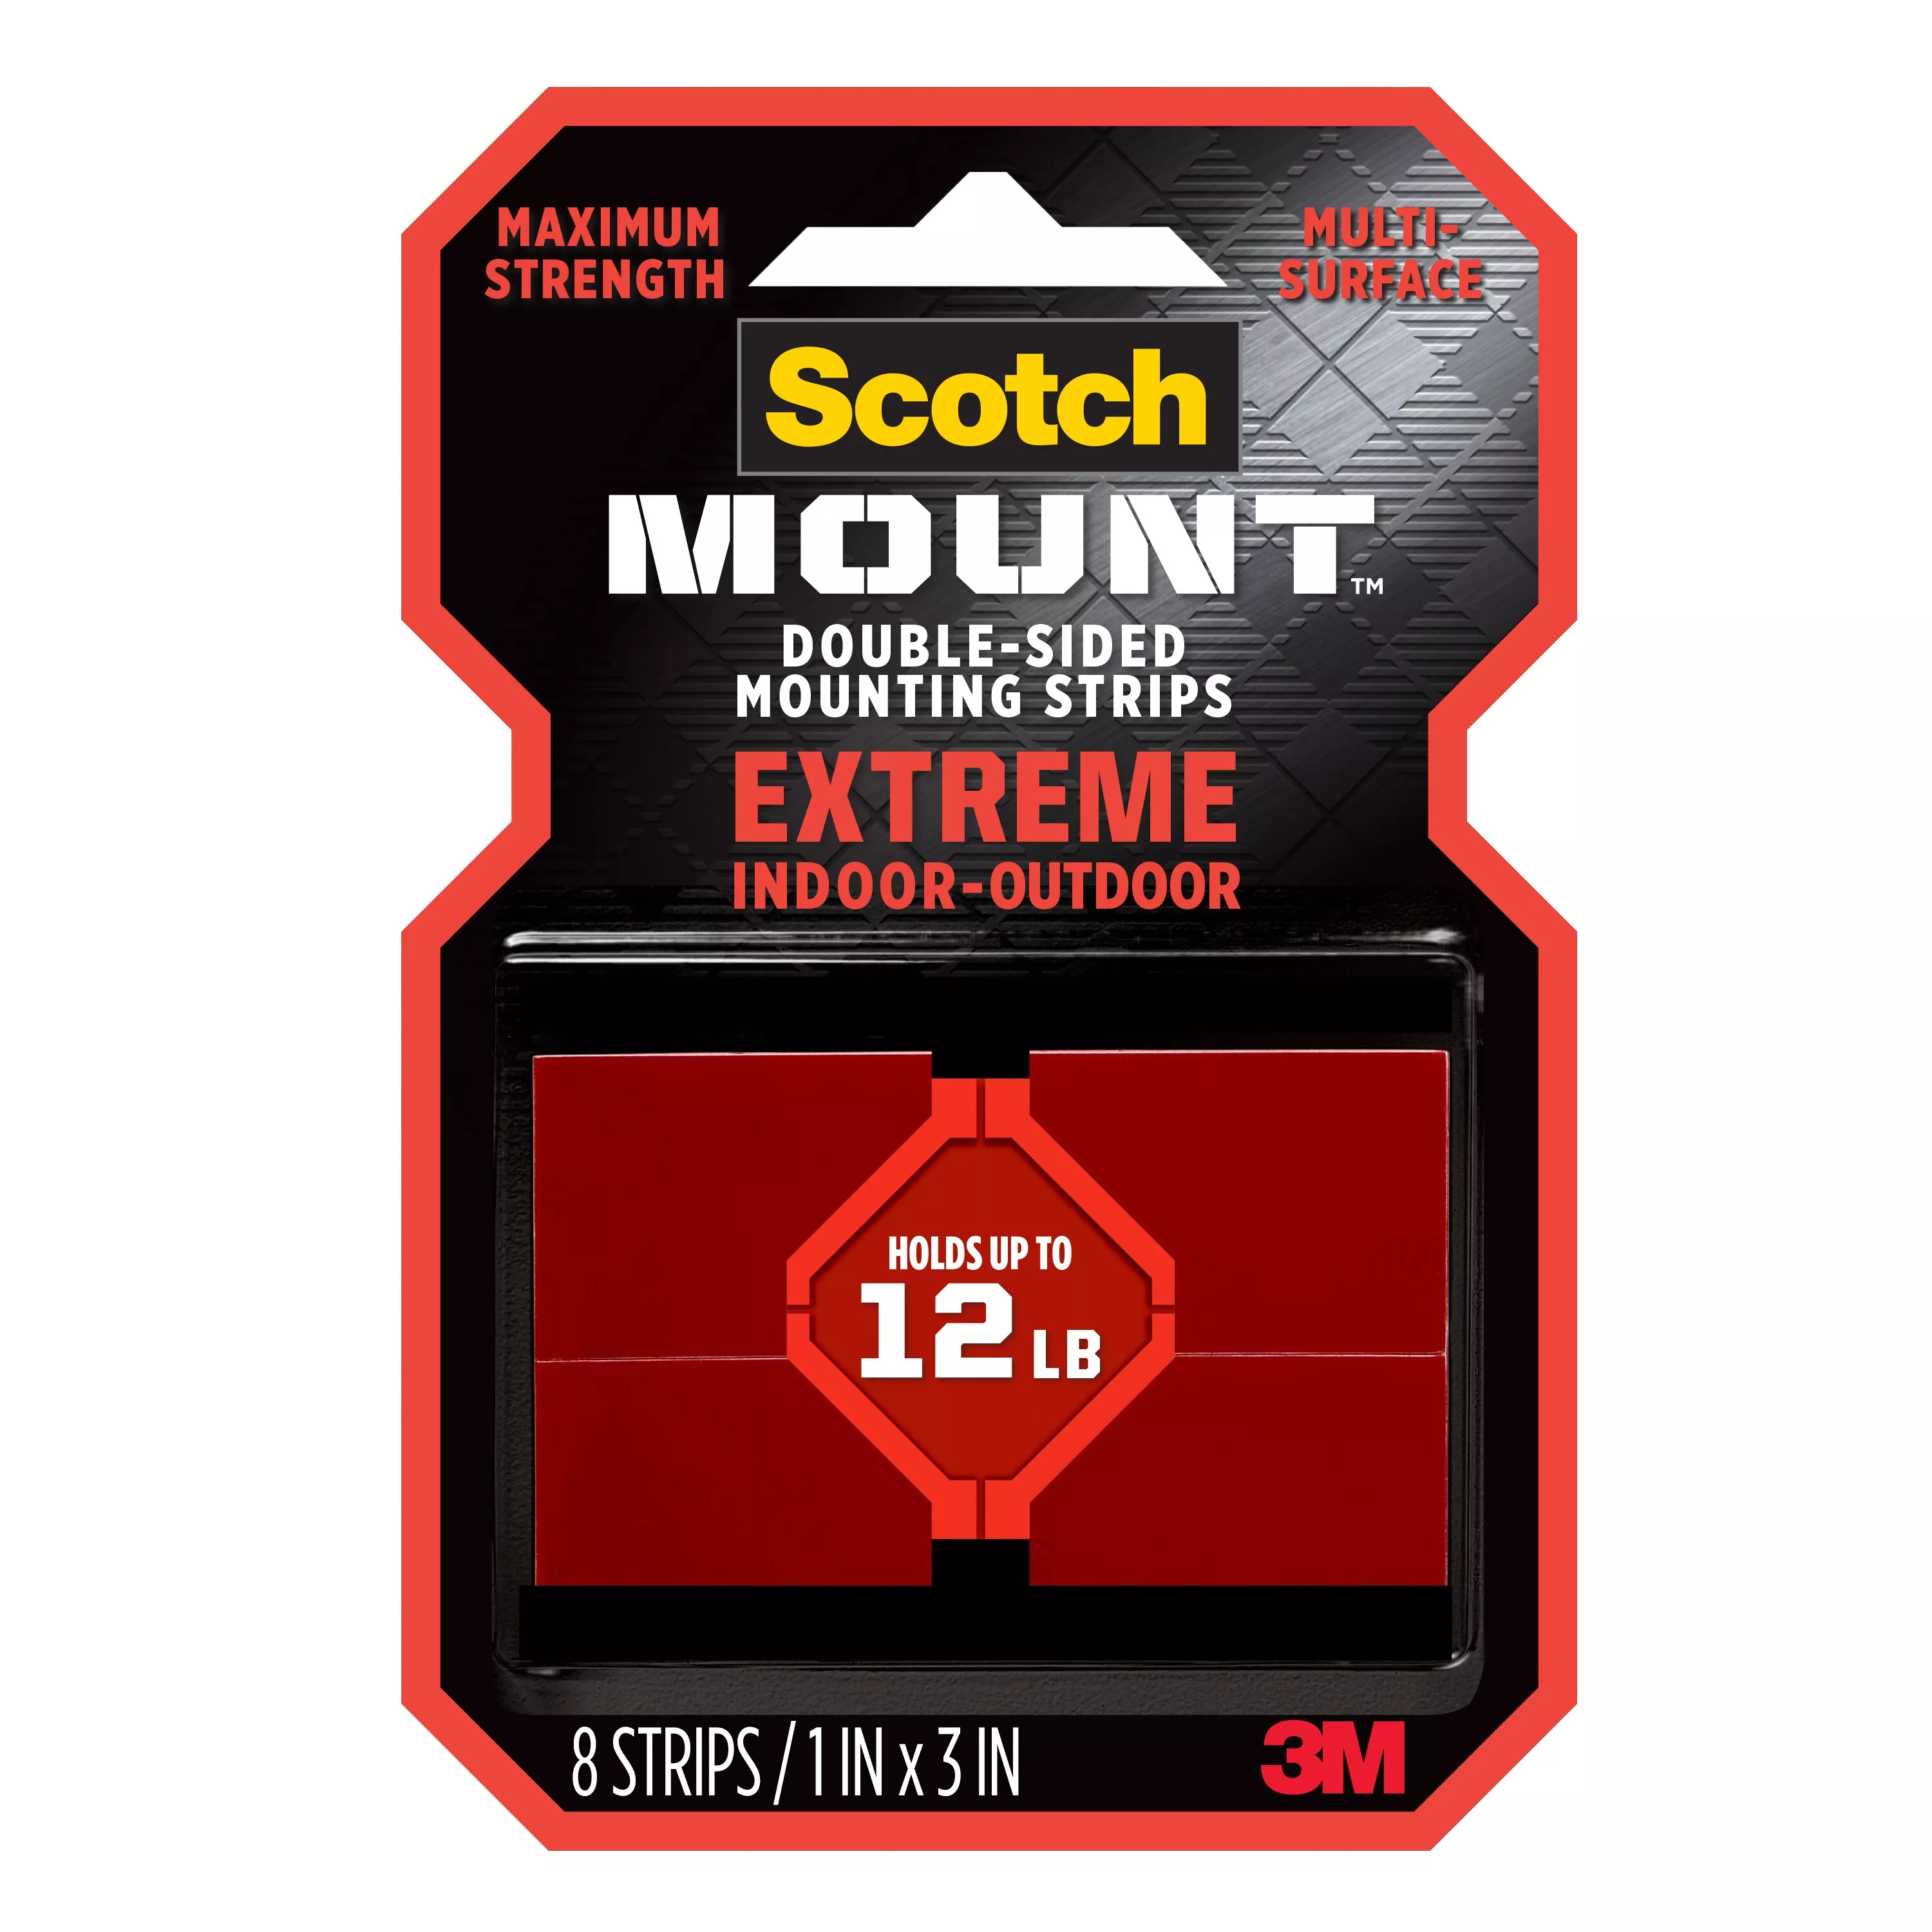 Scotch-Mount™ Extreme Double-Sided Mounting Strips 414H-ST, 1 in x 3 in (2,54 cm x 7,62 cm) EA, 8 Strips